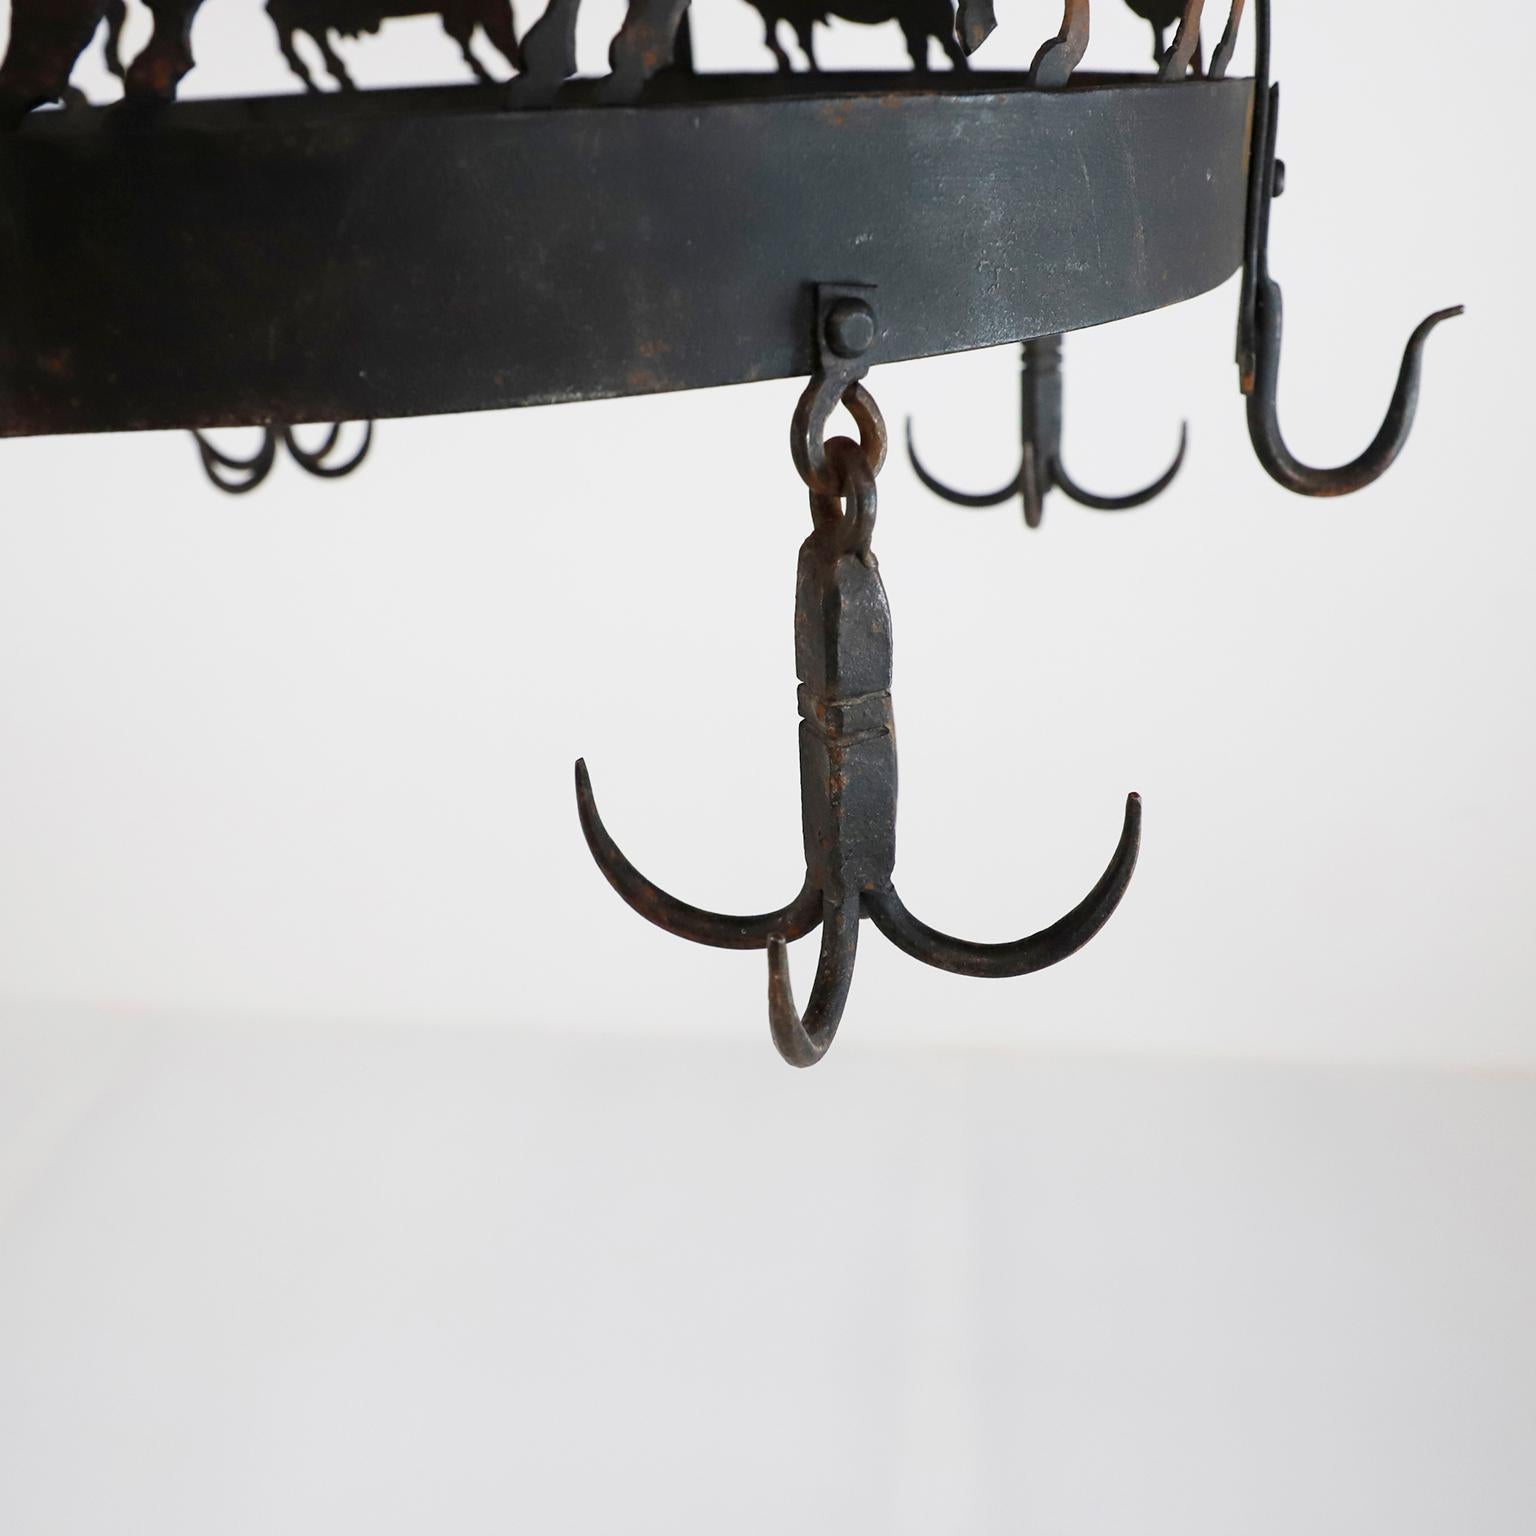 Circa 1940, we offer this rare Mexican Butcher's rack made in iron.